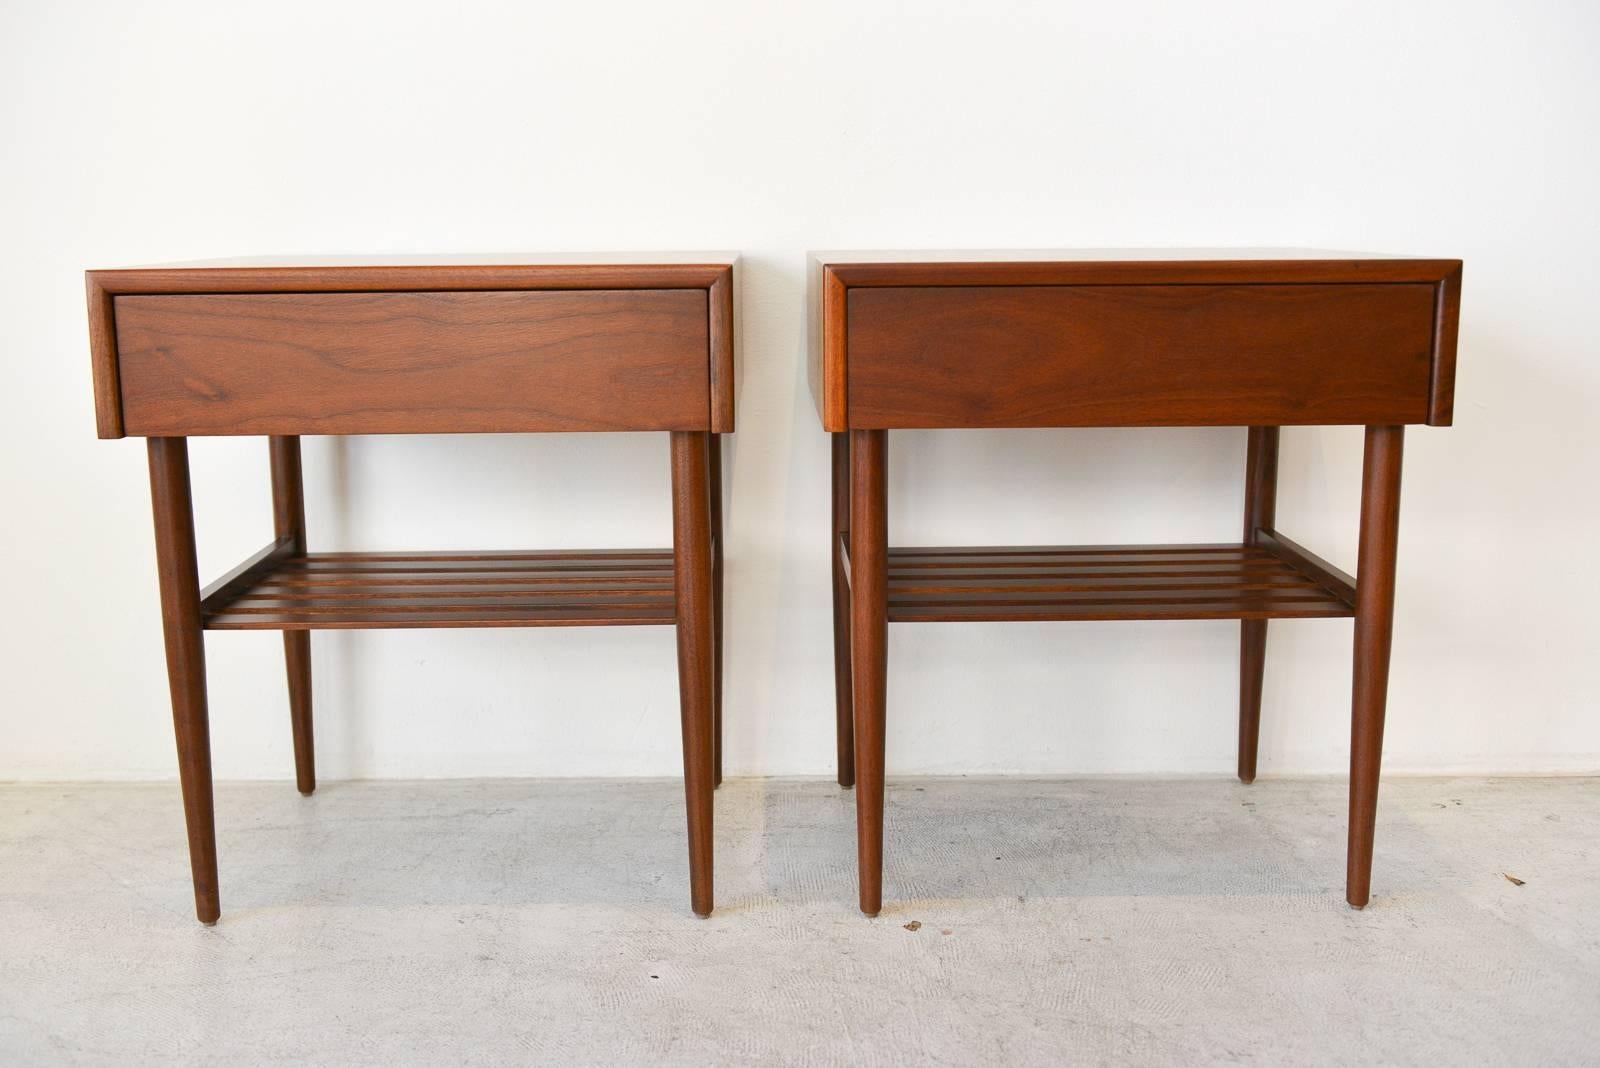 Pair of walnut side tables or nightstands by Brown Saltman professionally restored in showroom perfect condition, perfect size and scale for your living room or could also be used as nightstands in the bedroom.

Lower slatted shelf for additional